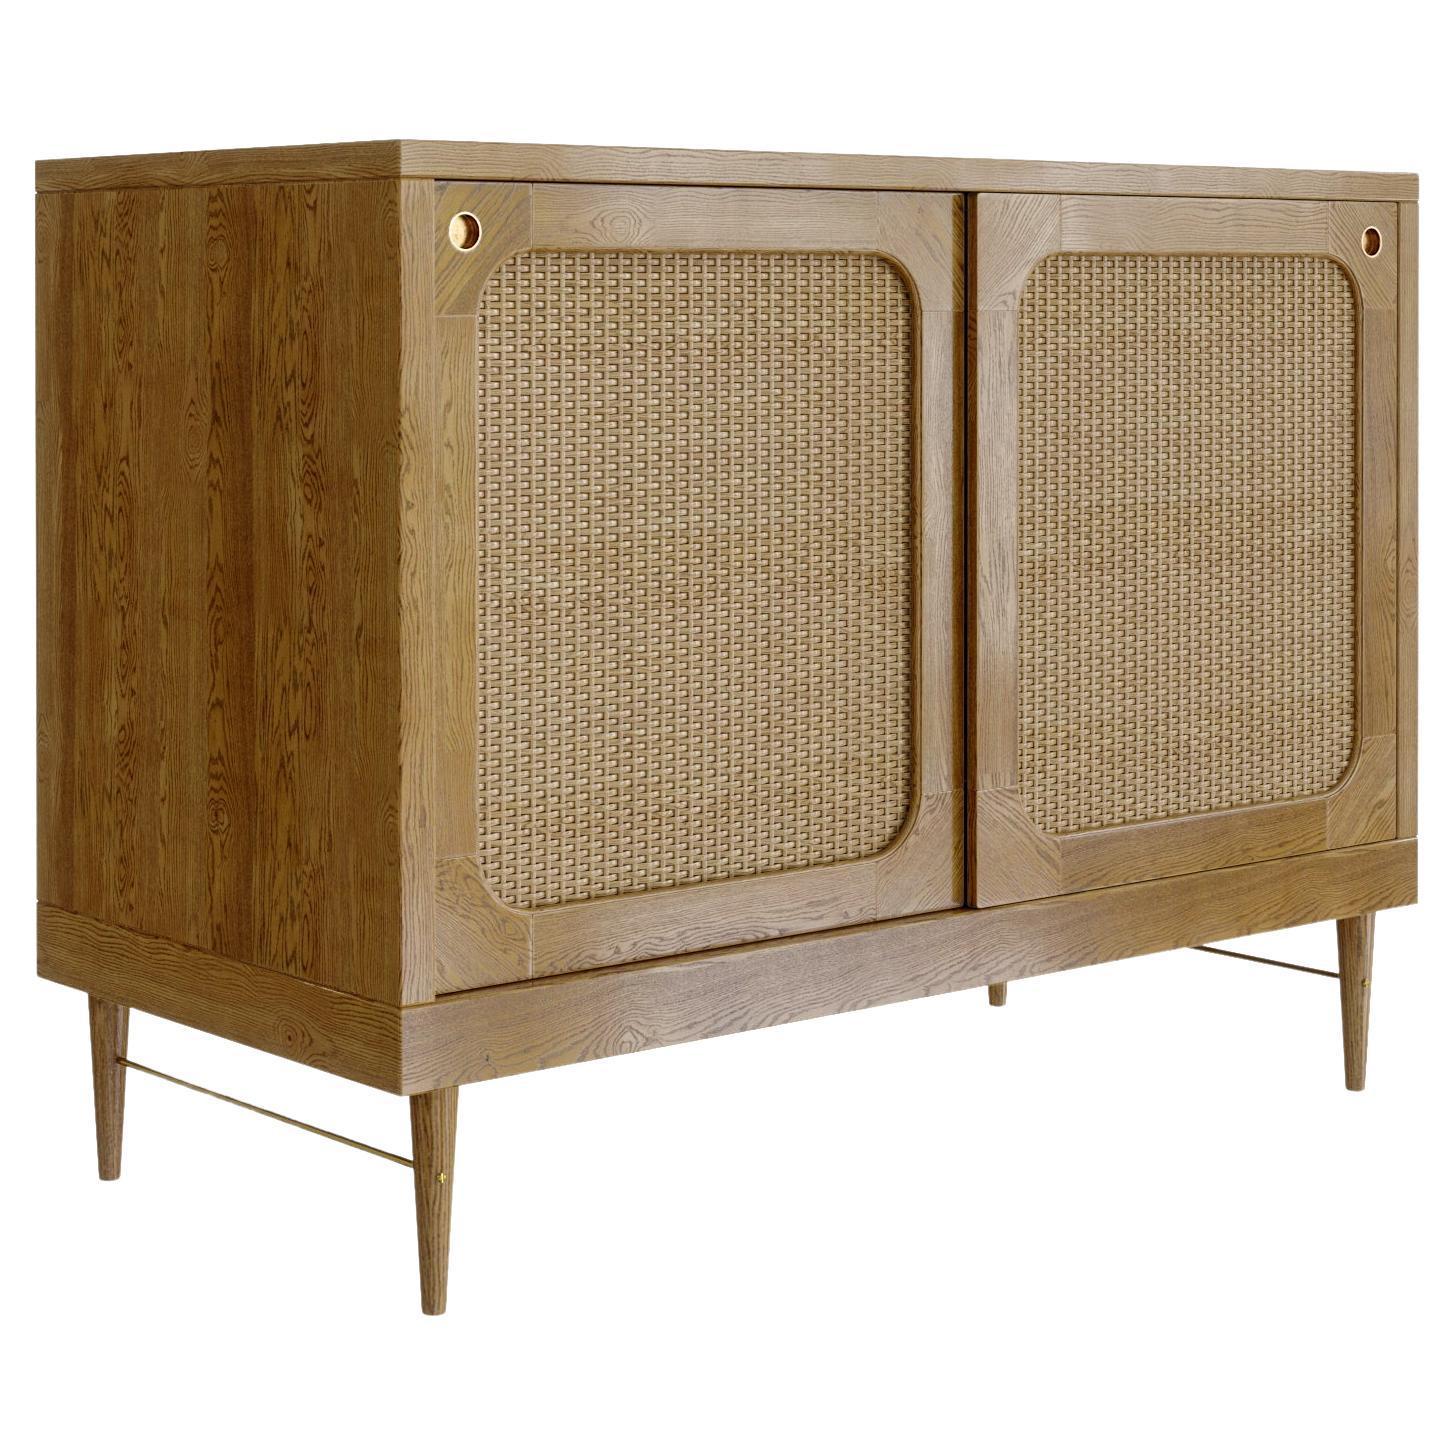 A sideboard in European oak and rattan, developed by Lind + Almond especially for Sanders, Copenhagen's premier luxury boutique hotel.

Available in two timber tones, Cognac and Natural Oak. Handcrafted to order in Europe. Internally there are two